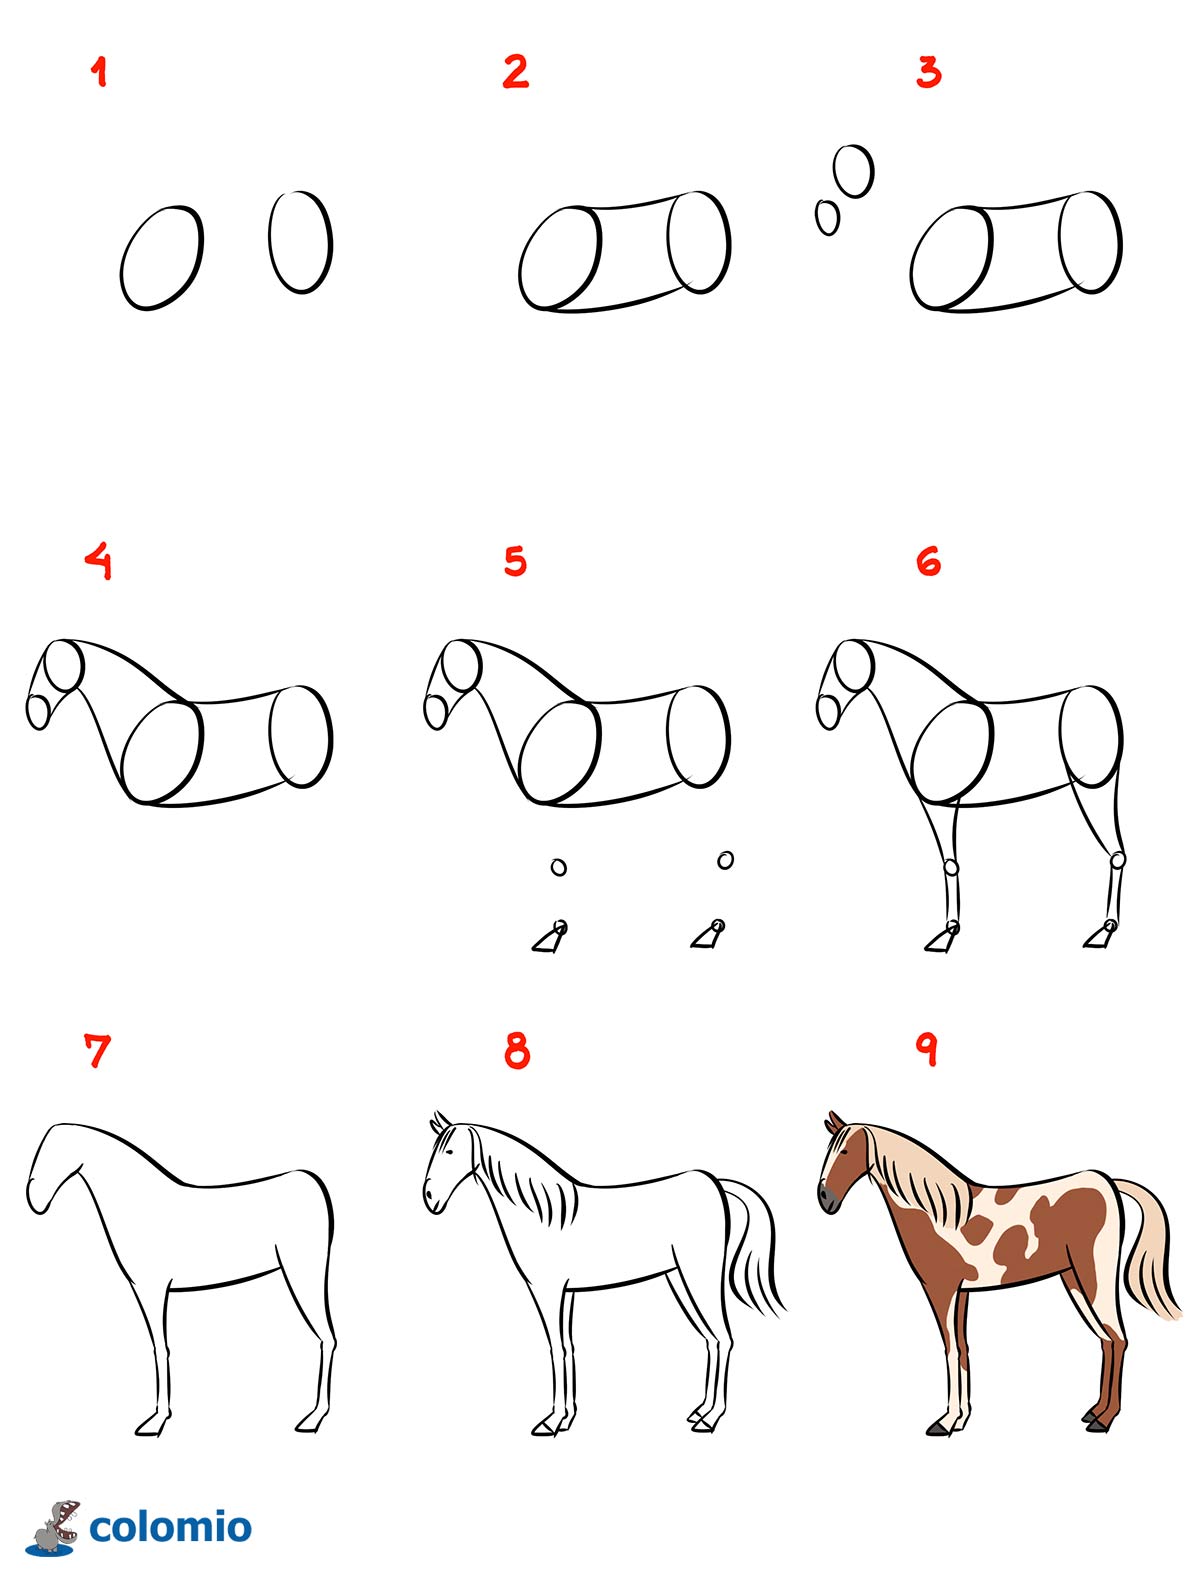 How to Draw a Horse - Step by step instructions